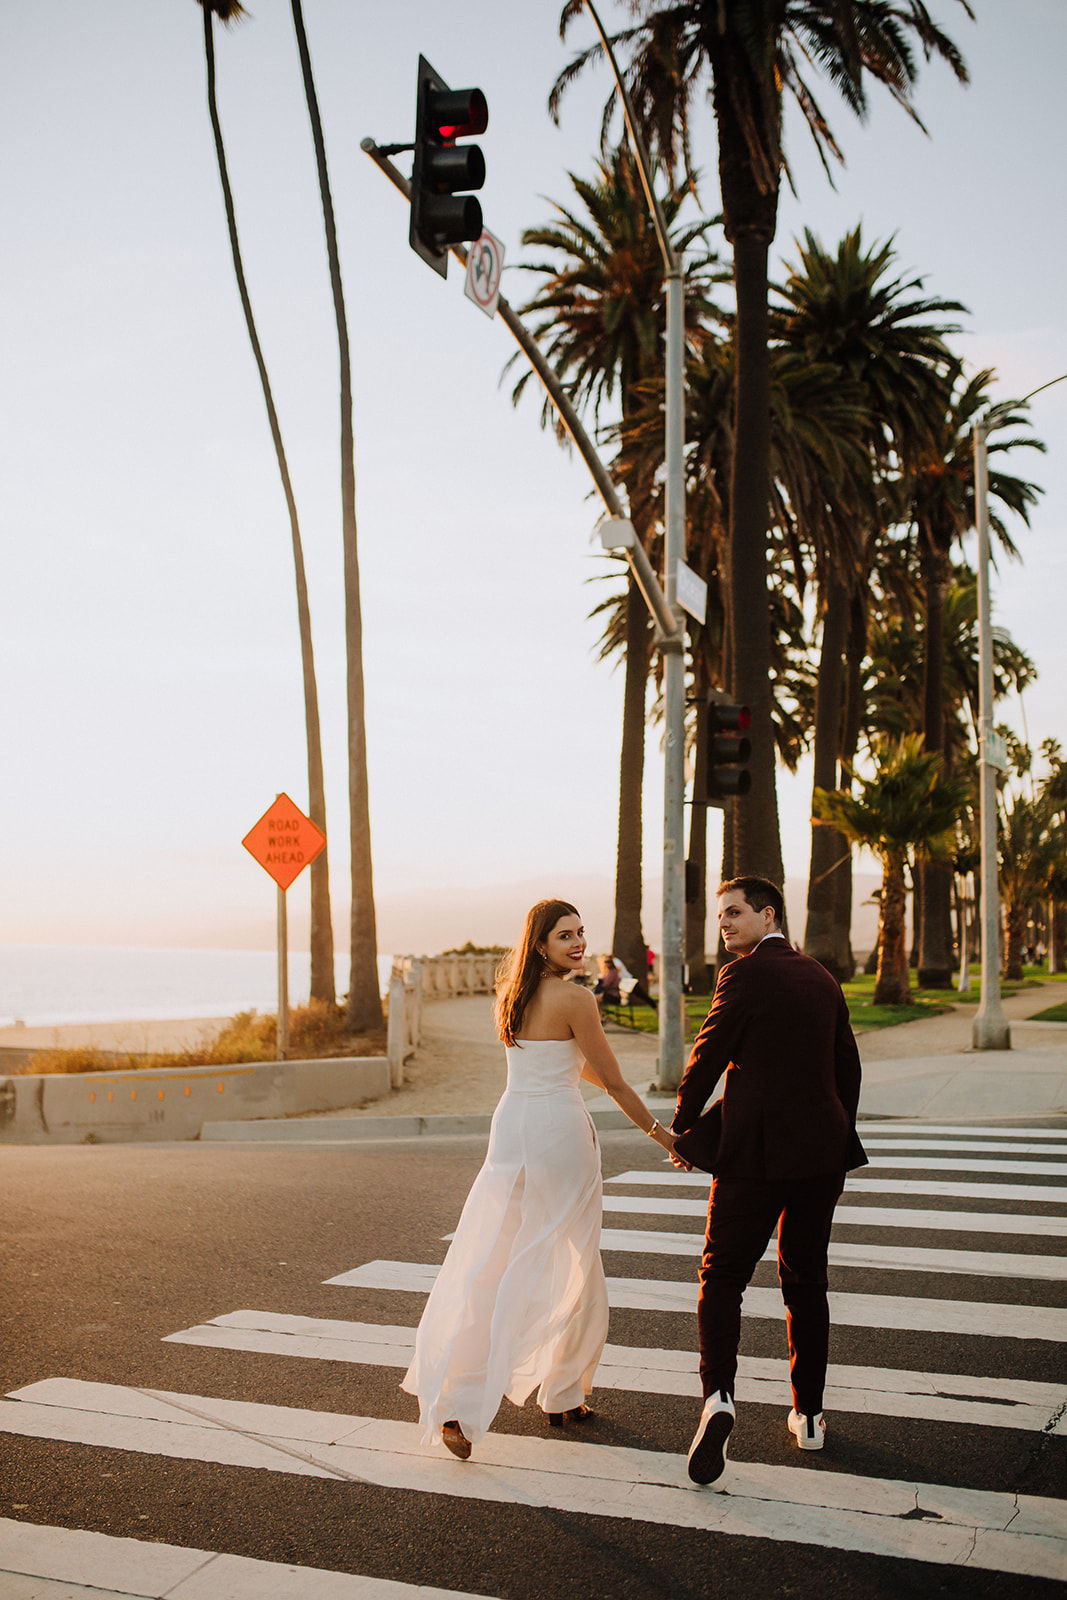 stunning couple walk together with the beautiful West Coast sunset in the background